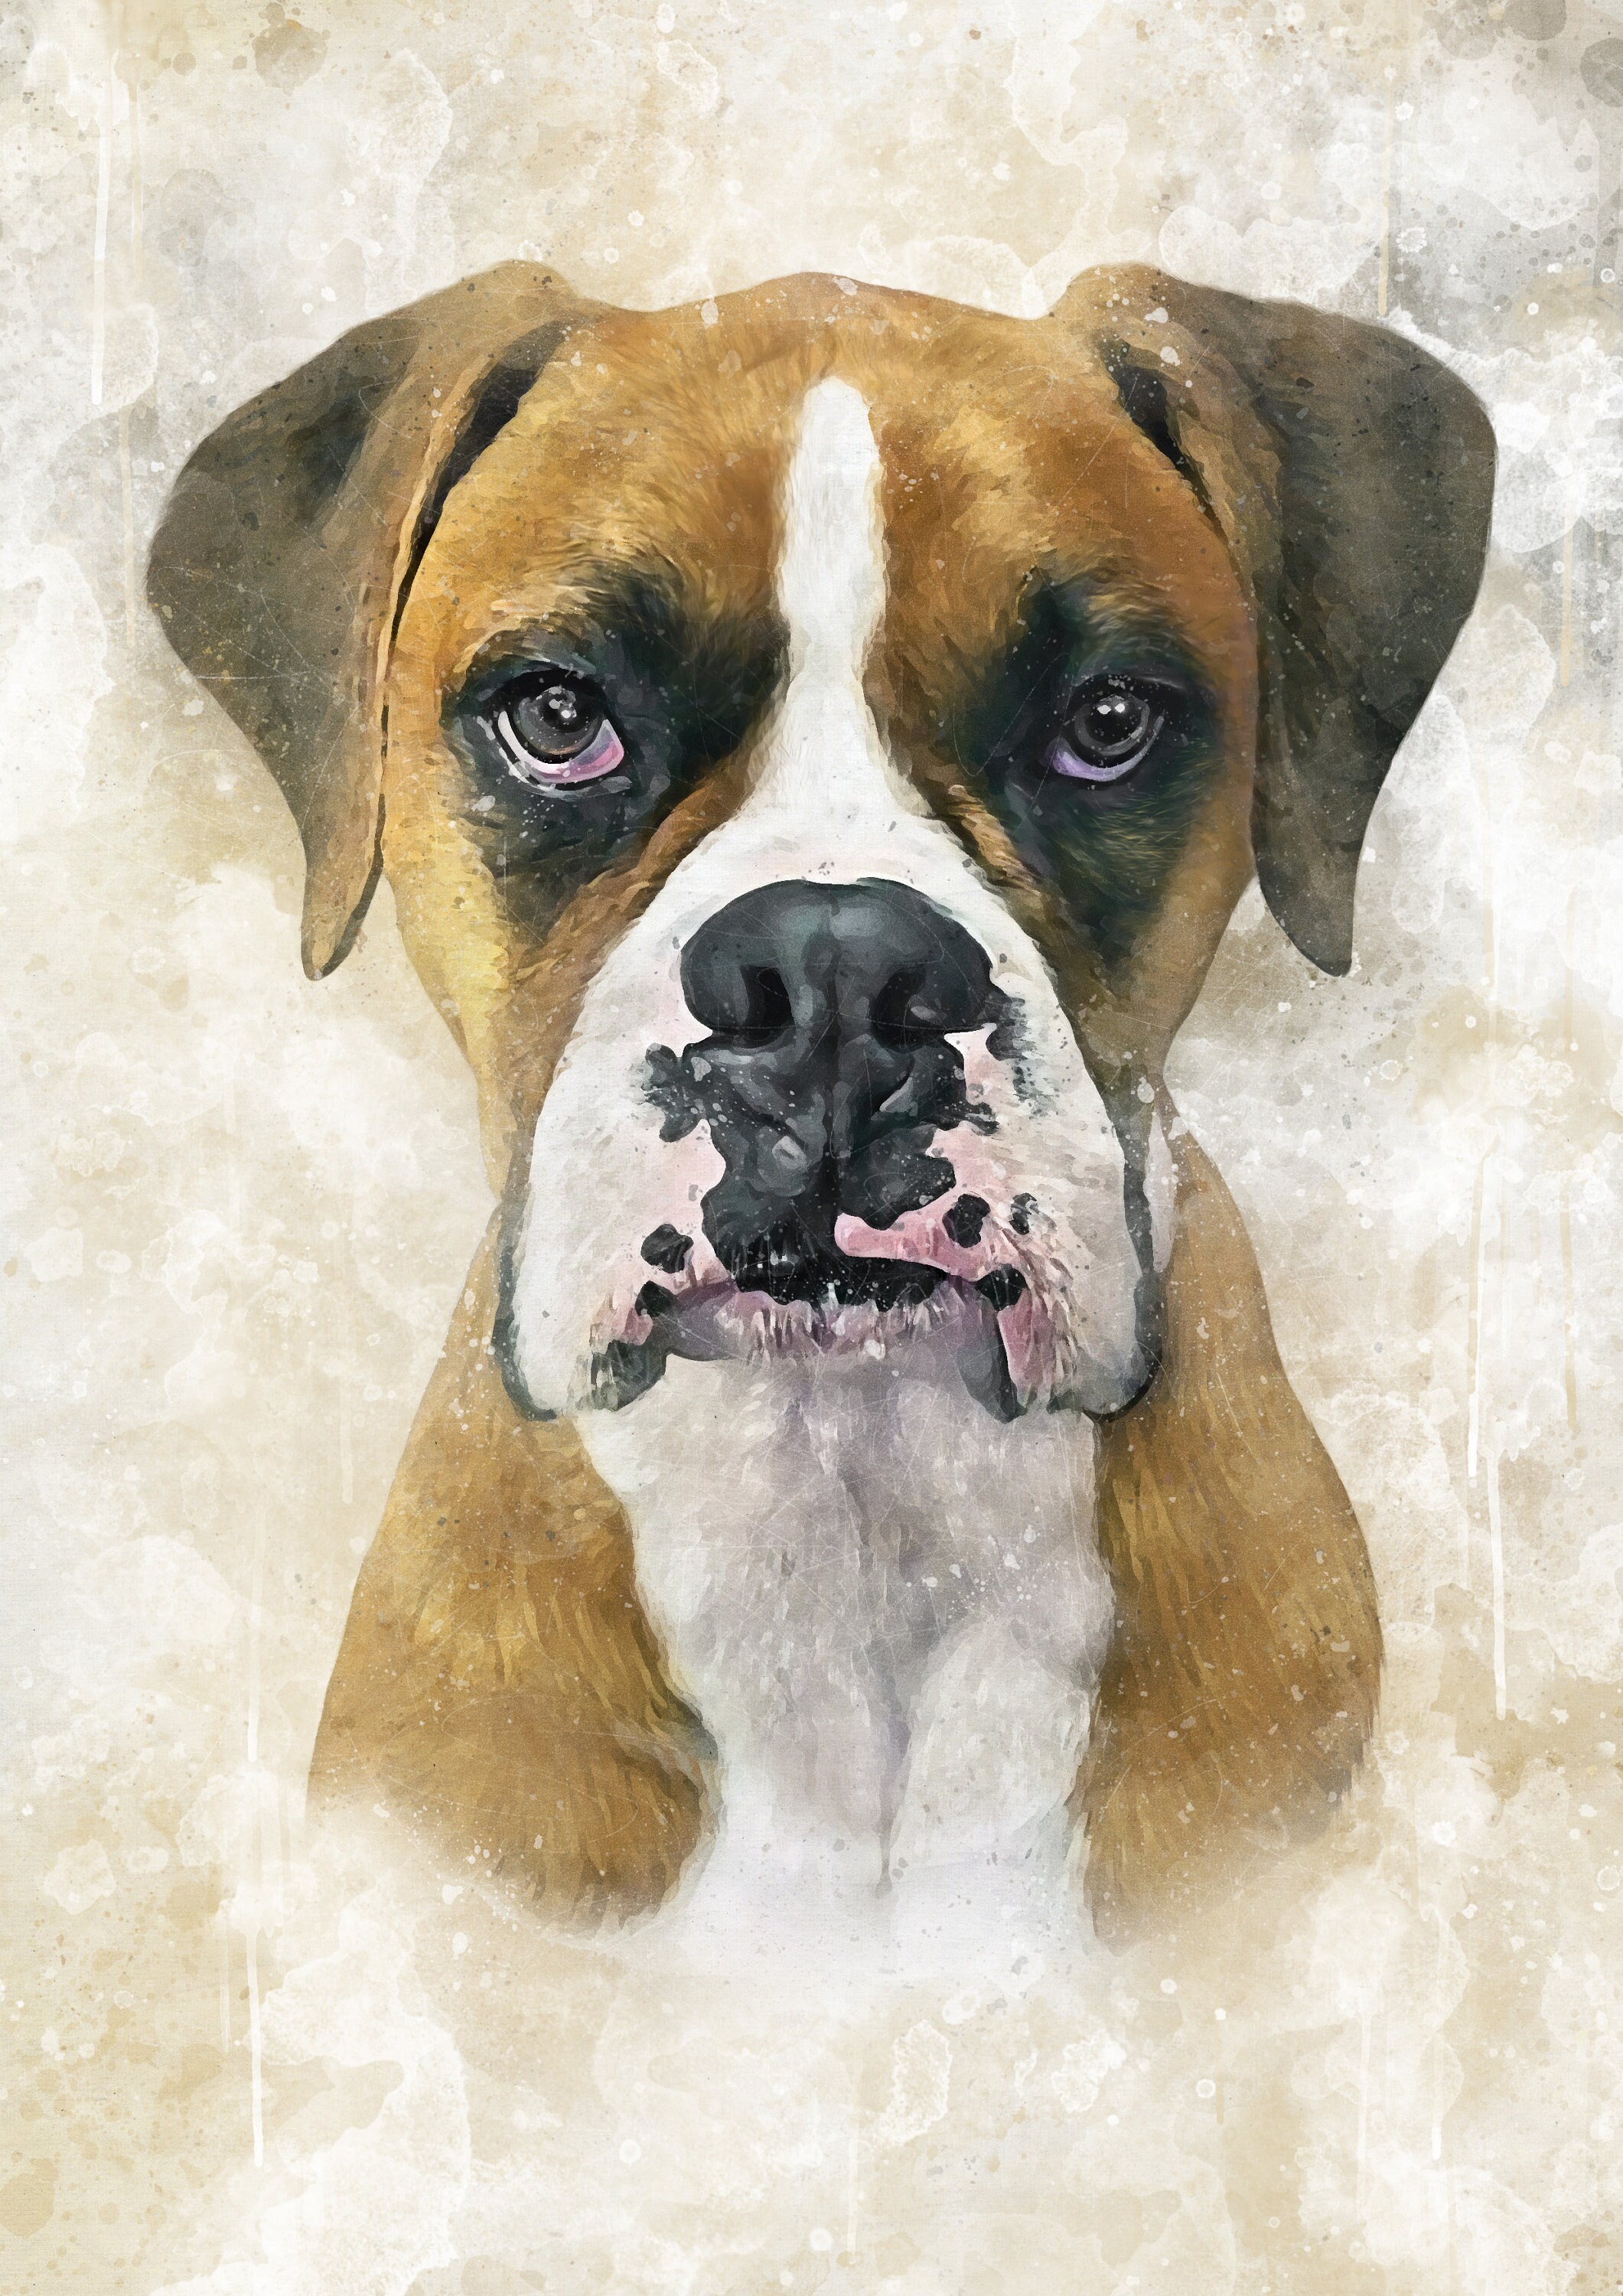 Watercolor Dog Portrait Express Delivery Worldwide Watercolor Pet Portrait Painted with Digital Brushes Unique Personalized Pet Gift